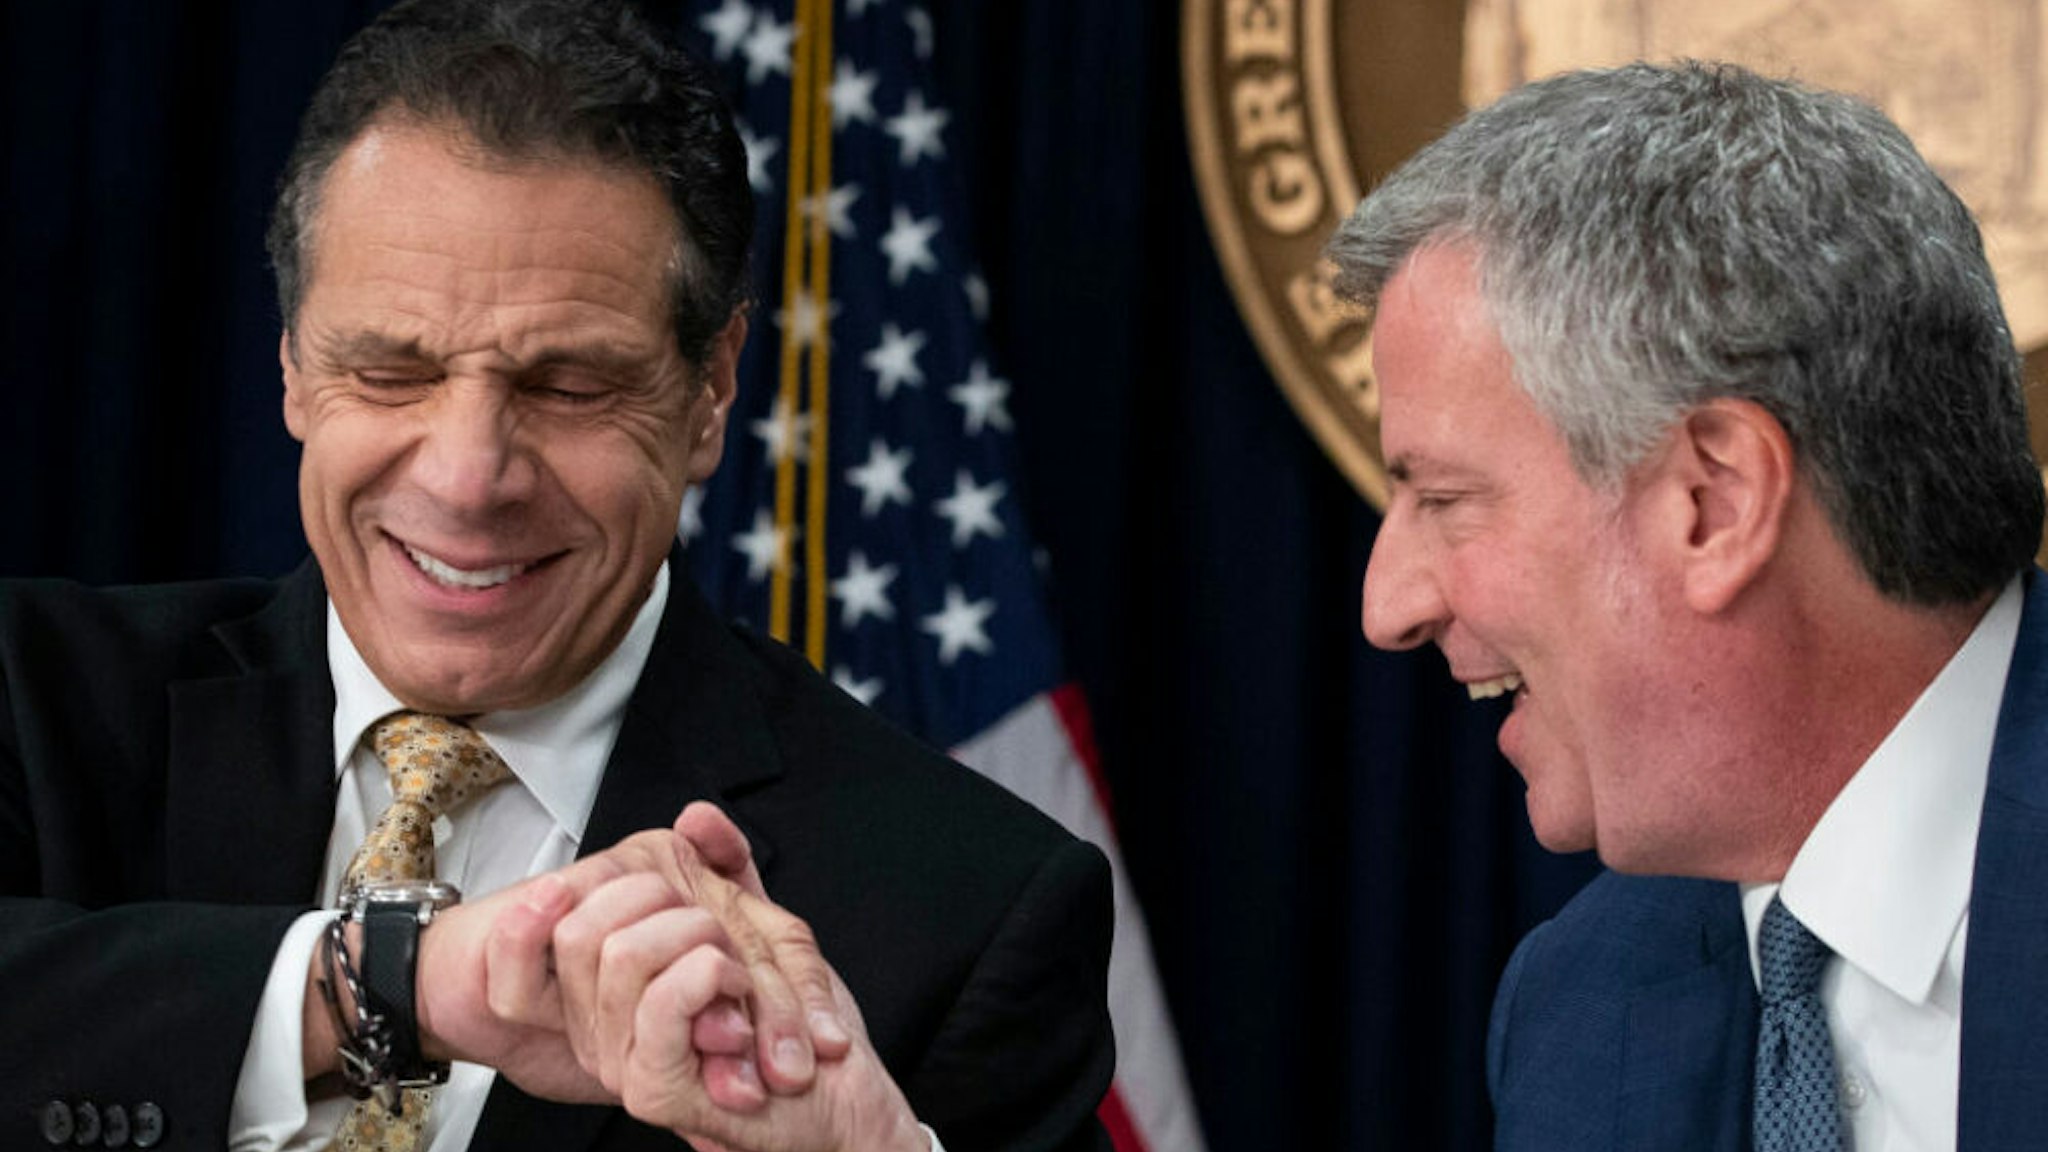 NEW YORK, NY - NOVEMBER 13: (L-R) New York Governor Andrew Cuomo and New York City Mayor Bill de Blasio shake hands during a press conference to discuss Amazon's decision to bring a new corporate location to New York City, November 13, 2018 in New York City. Amazon announced earlier in the day that it has chosen Arlington, Virginia and Long Island City in Queens as the two locations, which will both serve as additional headquarters for the company. Amazon says each location will create 25,000 jobs.